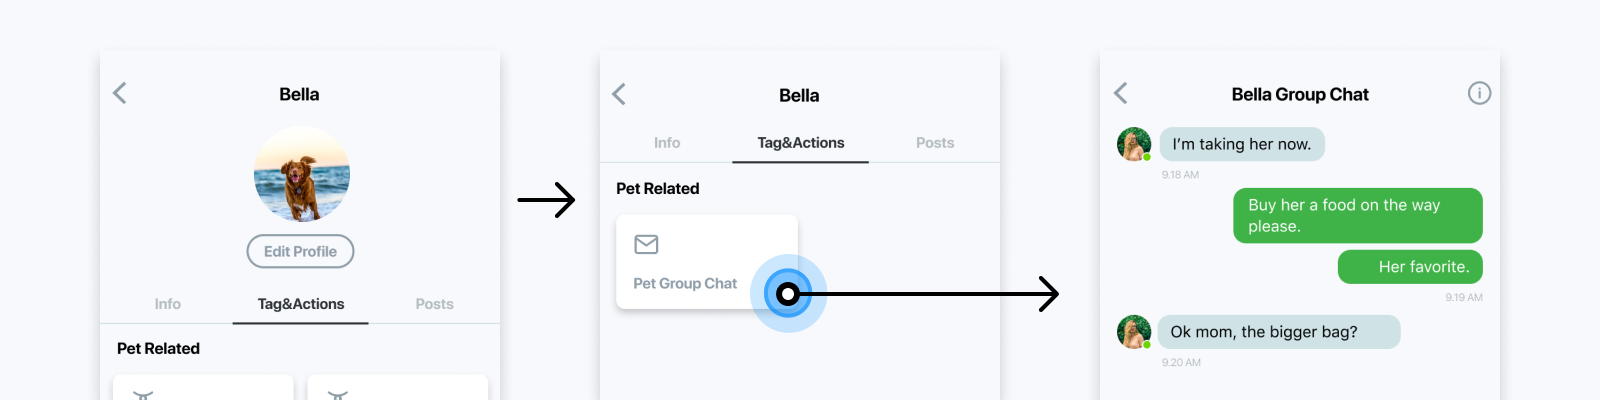 Pet_Profile___Tags___Actions___Pet_Group_Chat__group_chats_only_.png